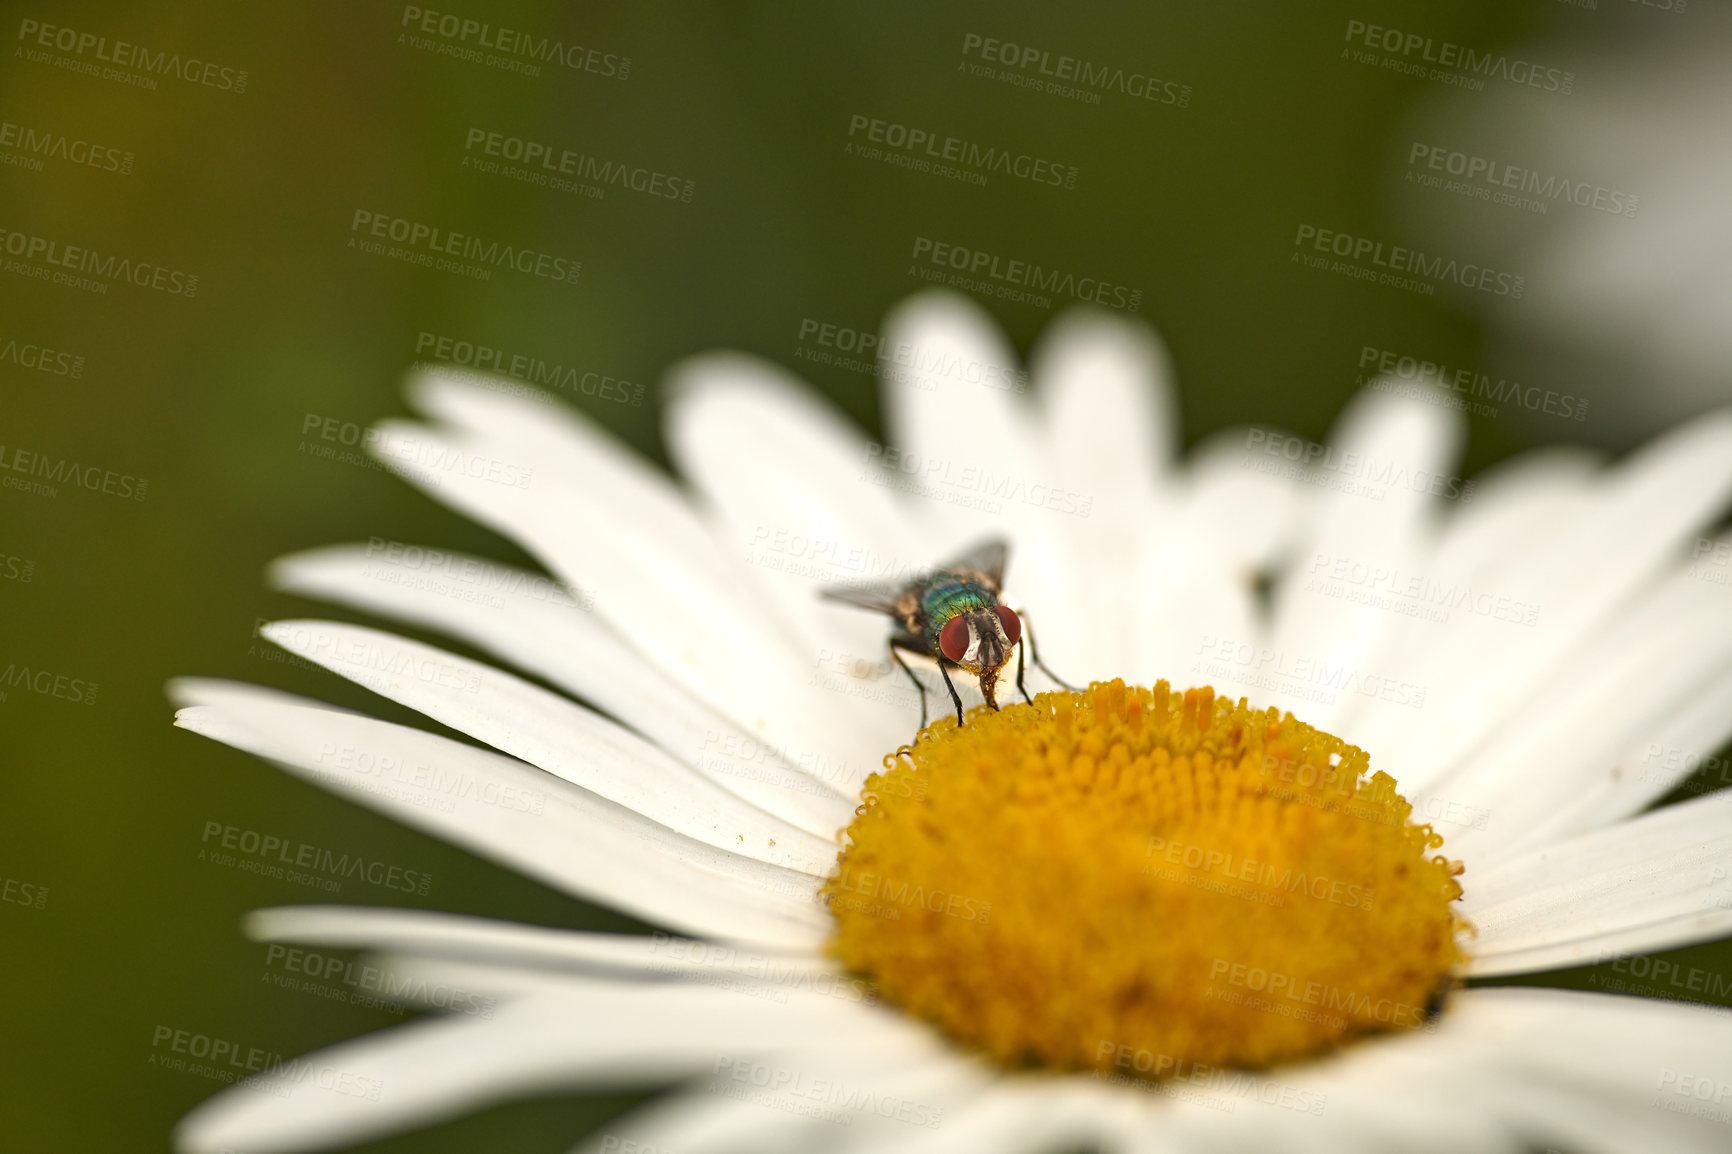 Buy stock photo Common green bottle fly pollinating a white daisy flower outdoors. Closeup of one blowfly feeding off nectar from the yellow pistil on a marguerite plant. Macro of an insect and bug in an ecosystem